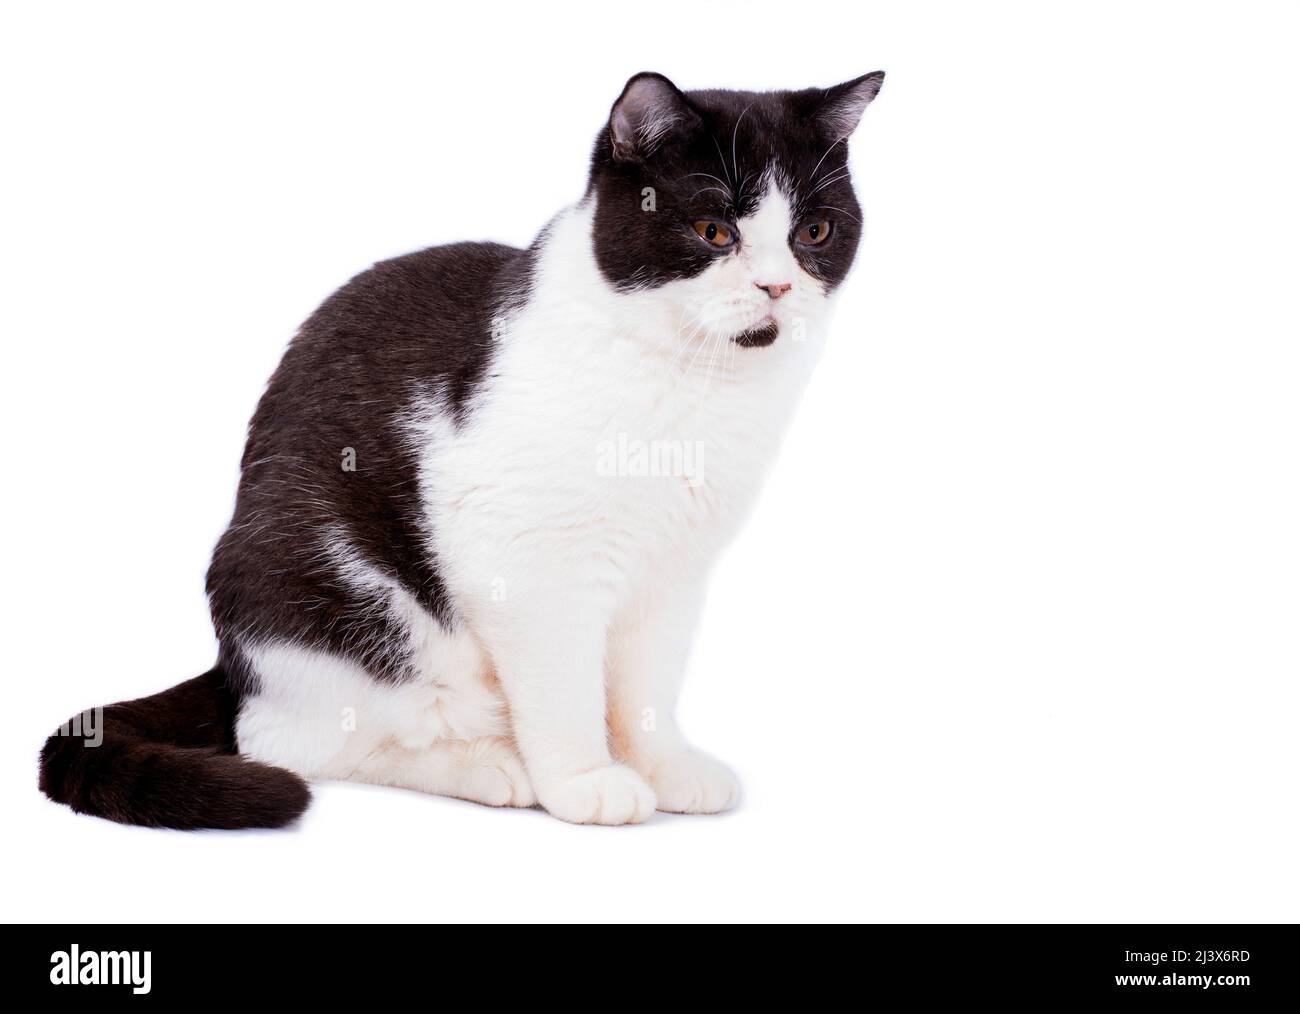 big Scottish cat harlequin color on a white background, isolated image, beautiful domestic cats, pets, Stock Photo